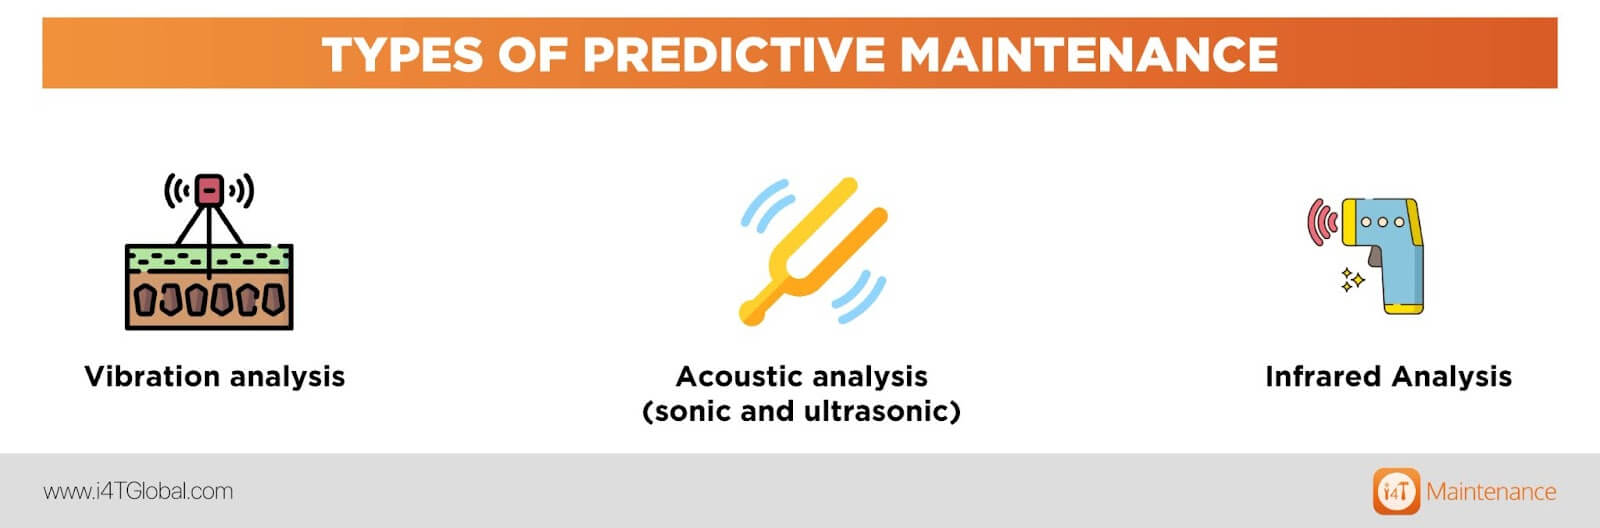 Types of predictive maintenance - i4T Global